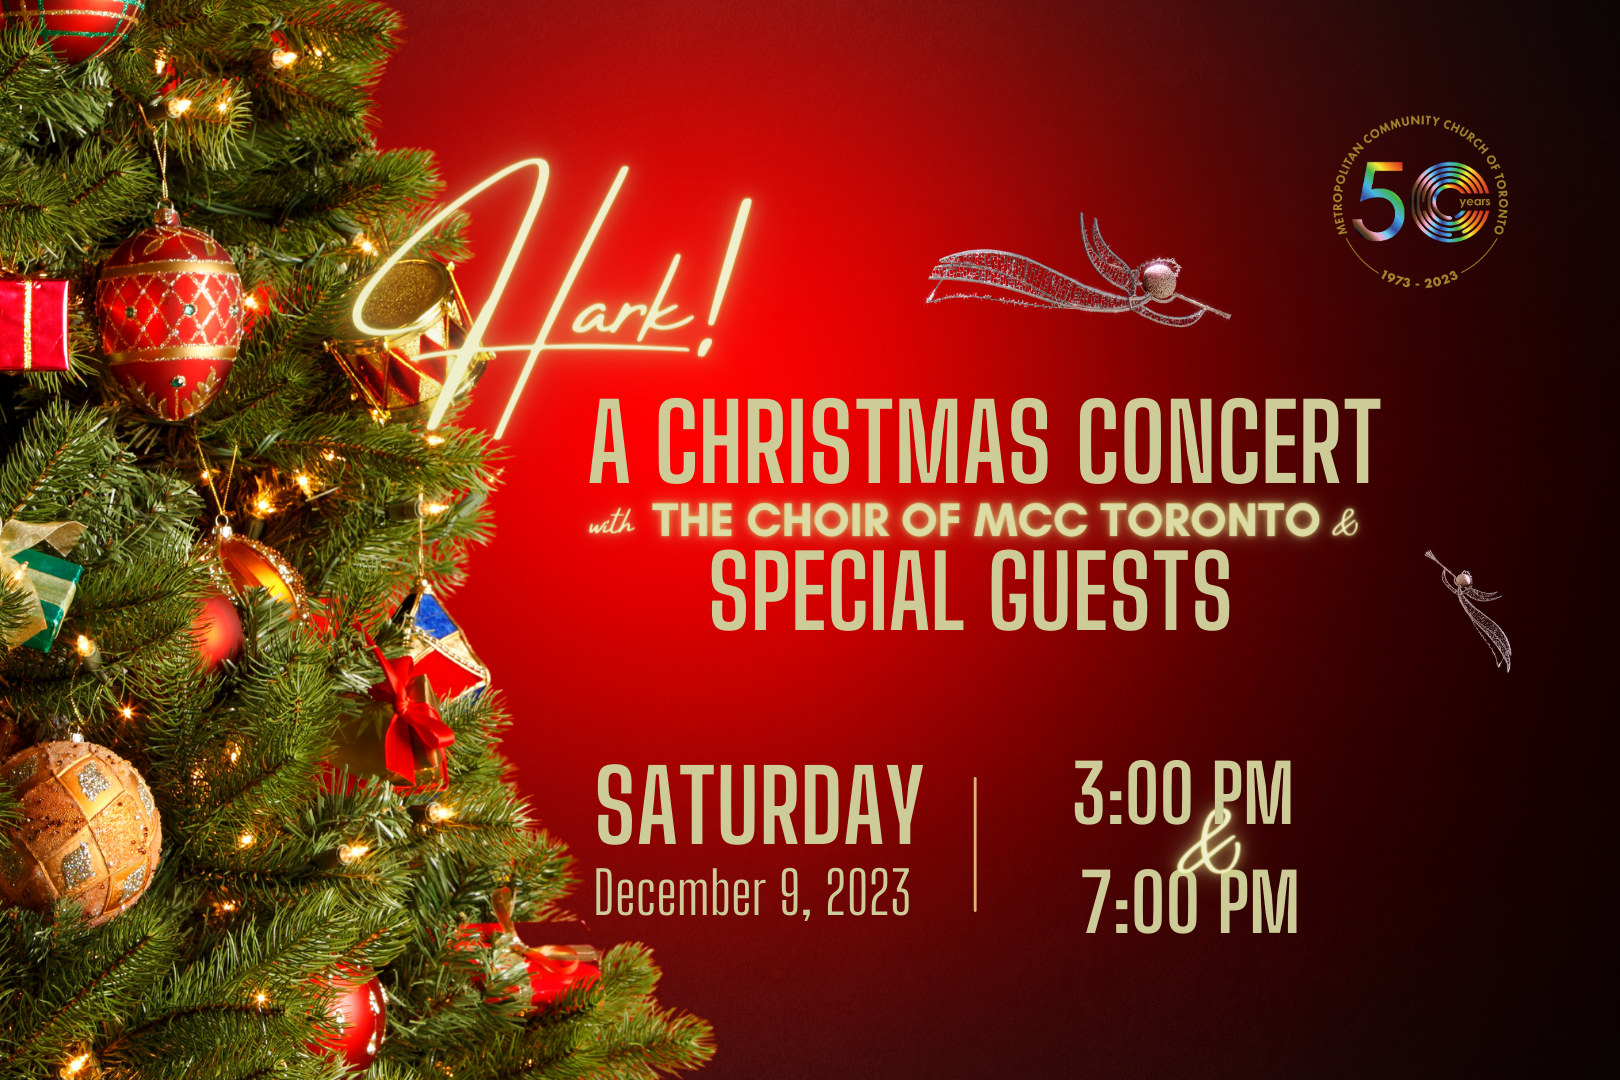 Picture of a Christmas tree on the left over a dark red background with text saying Hark! A Christmas Concert with The Choir of MCC Toronto and Special Guests. Saturday, December 9, 2023. At 3 PM and 9 PM